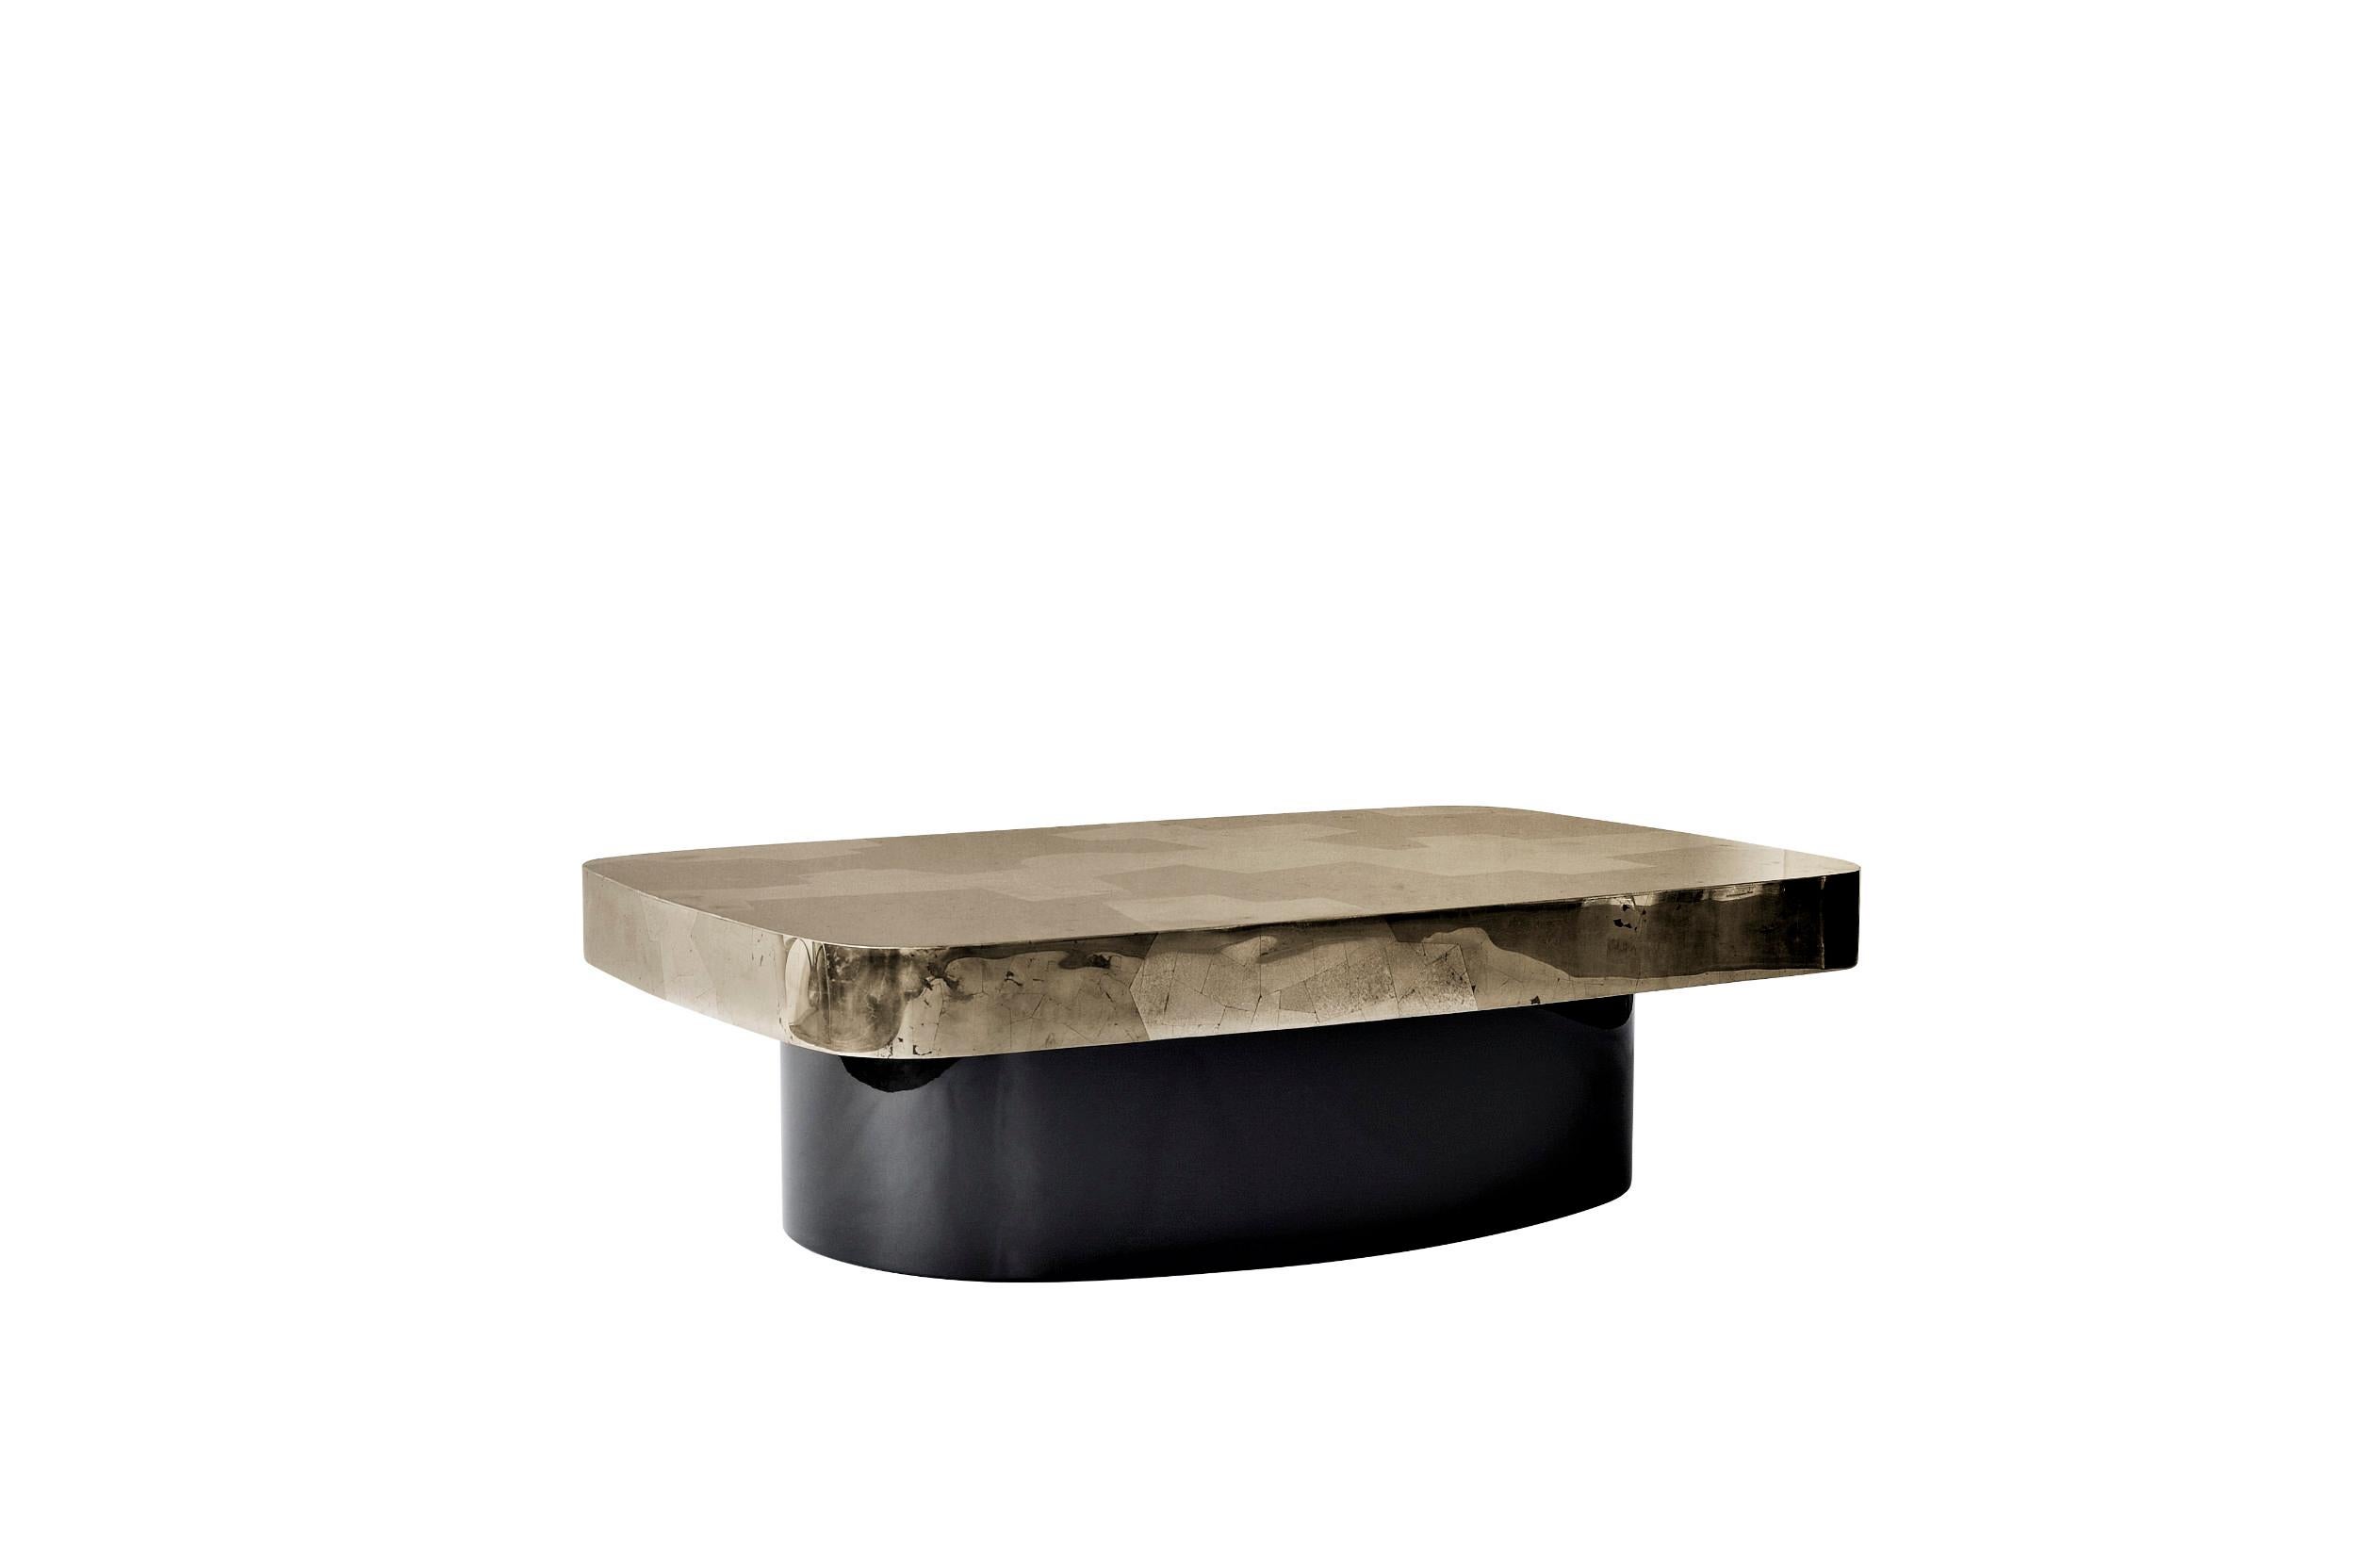 Emil coffee table by DeMuro Das 
Dimensions: W 80 x D 120 x H 36 cm
Materials: Pyrite (Golden) - Polished (Random), Pyrite (Silver) - Polished (Random) 
 Lacquer (Traffic Black 9017) - Glossy 
 
Dimensions and finishes can be